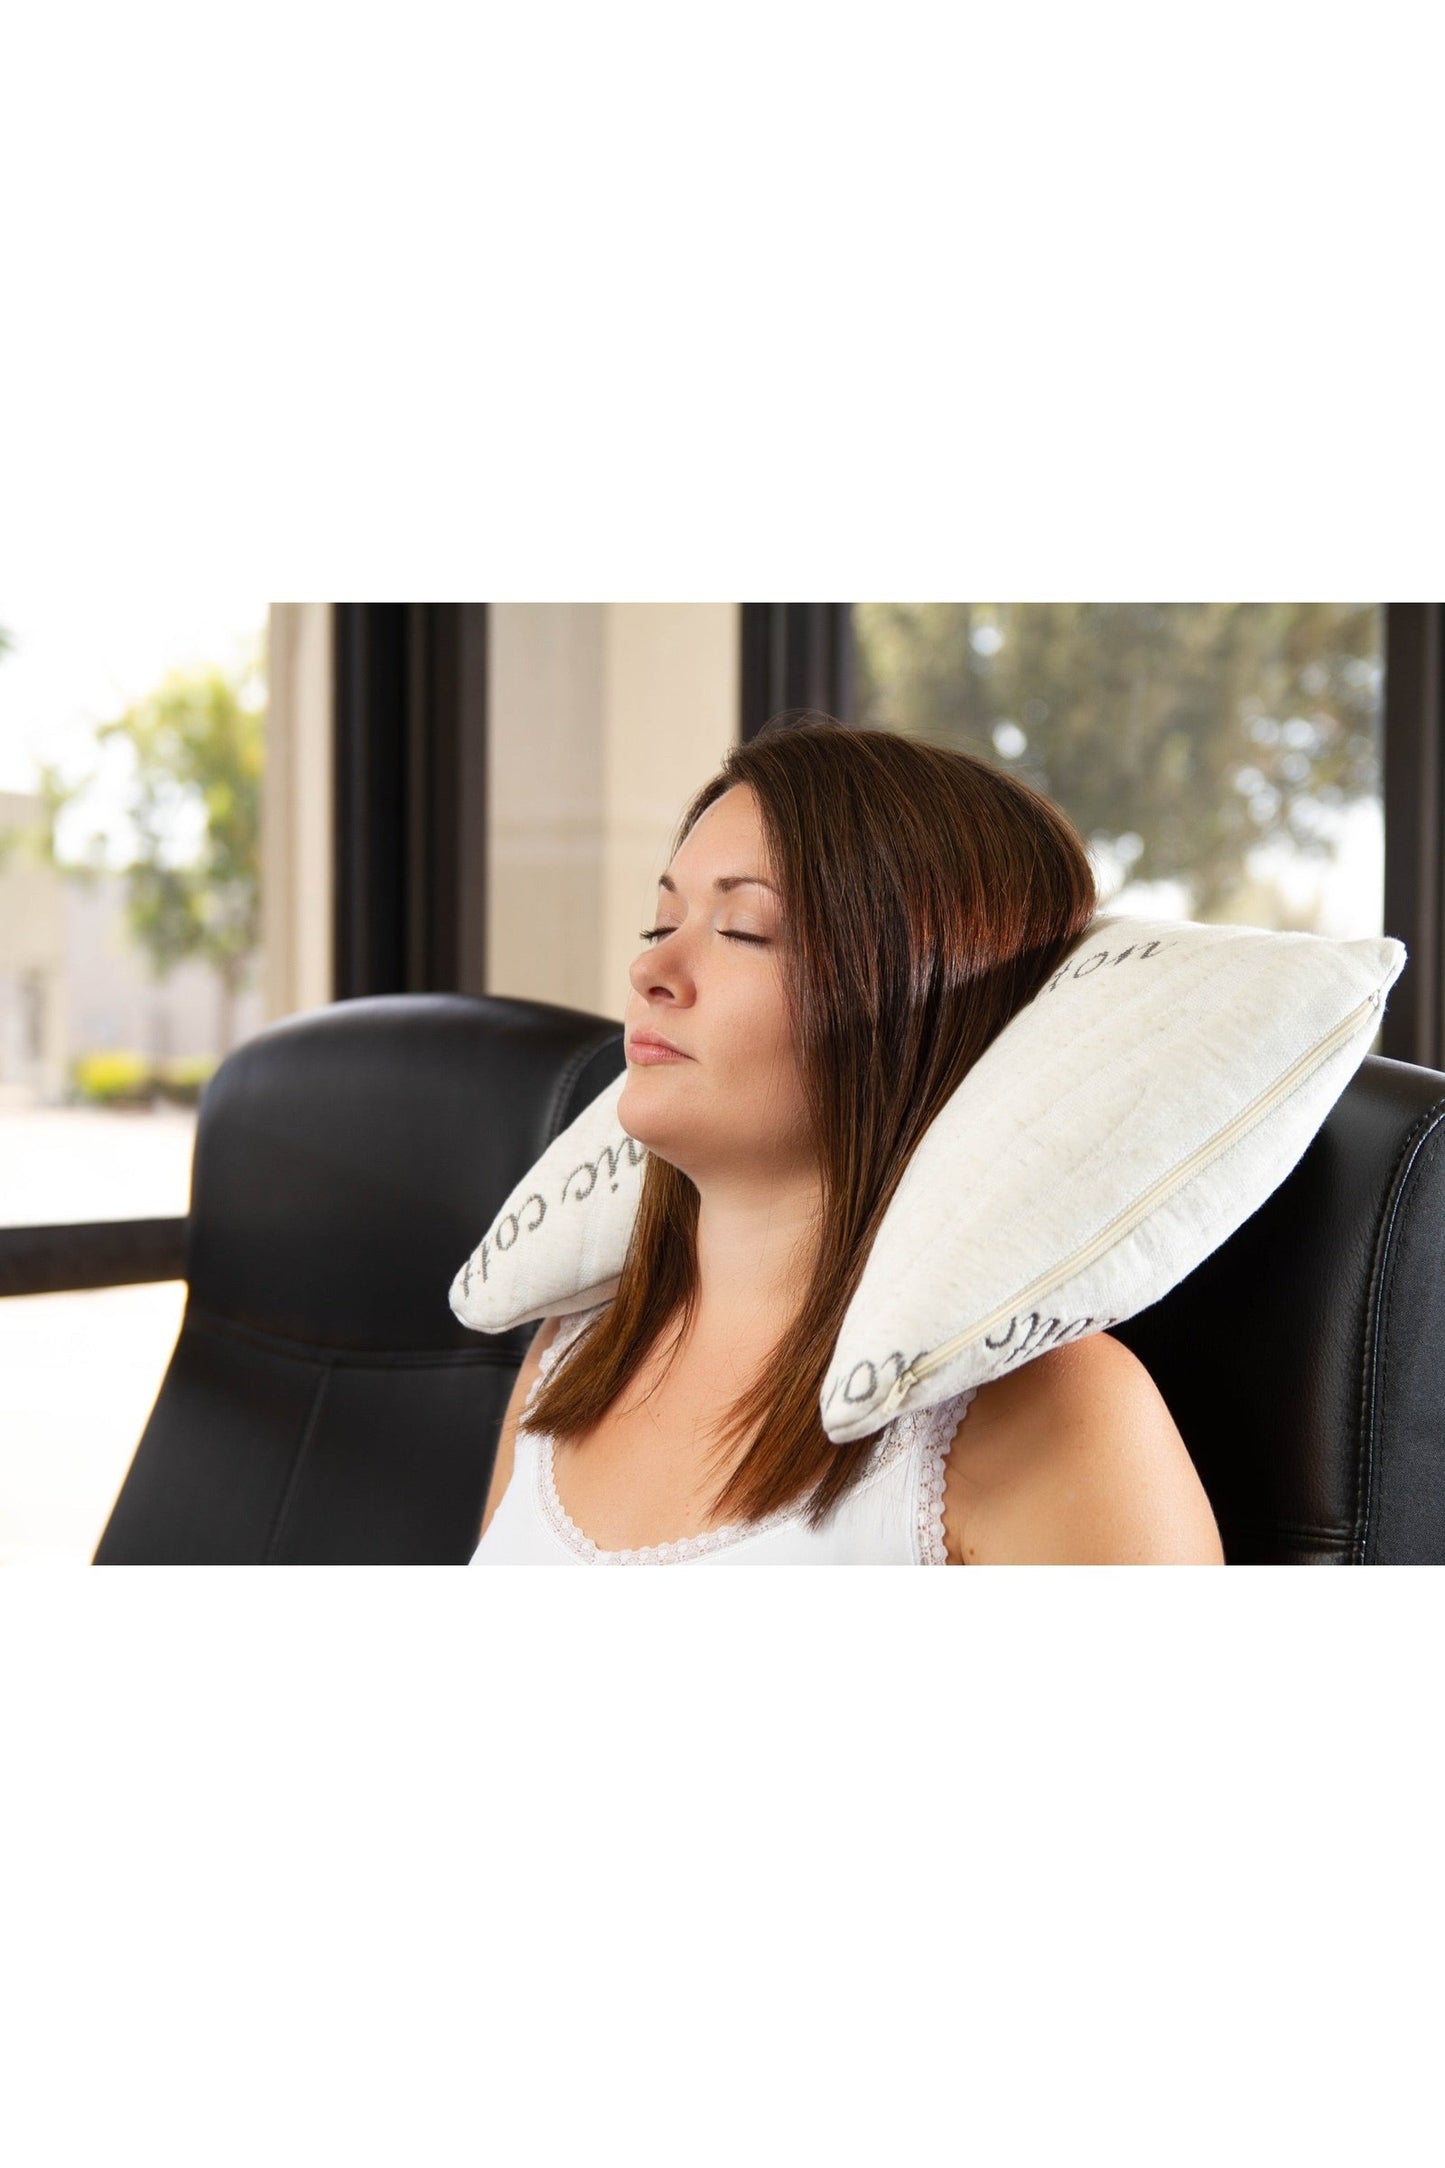 Natural Latex Travel Pillow and Organic Cotton Pillowcase- Neck Pillow for Airplanes and Cars - Adjustable Camping Pillow